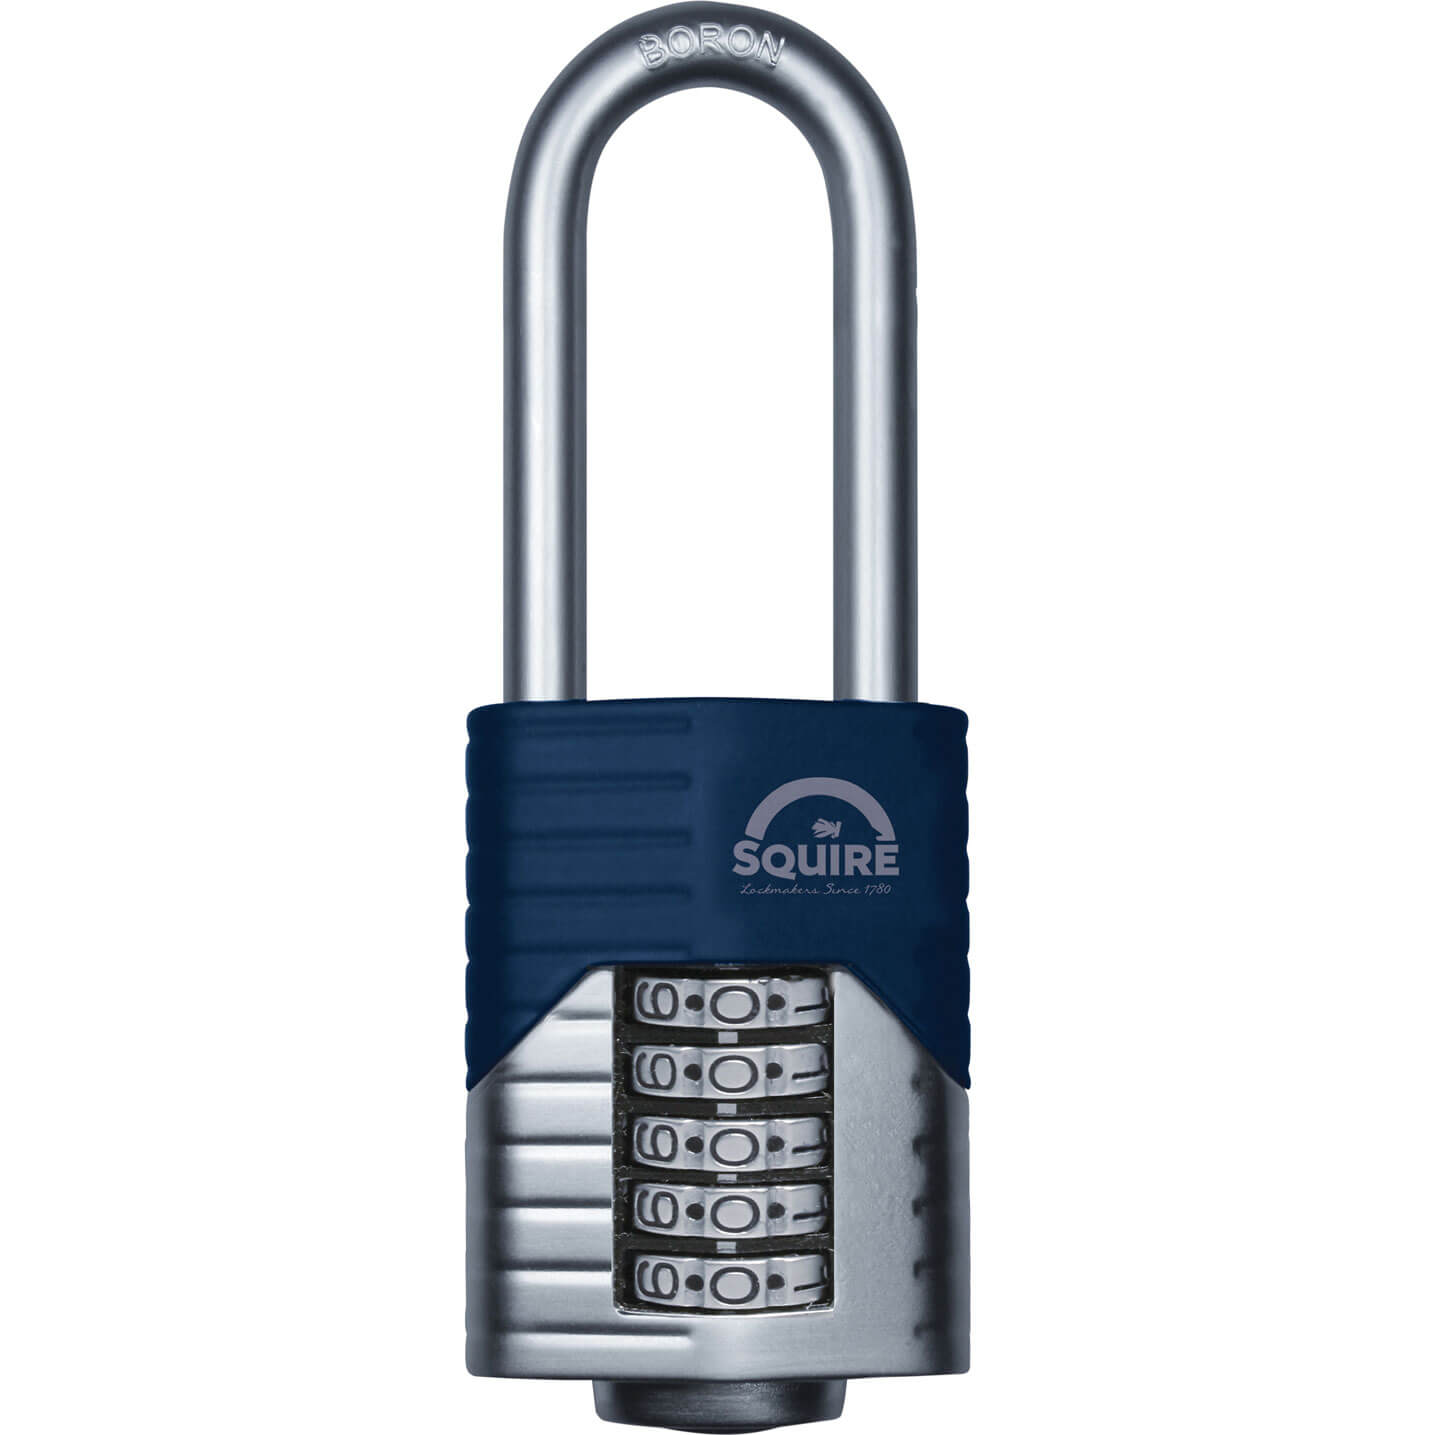 Image of Henry Squire Vulcan Boron Shackle Combination Padlock 60mm Long